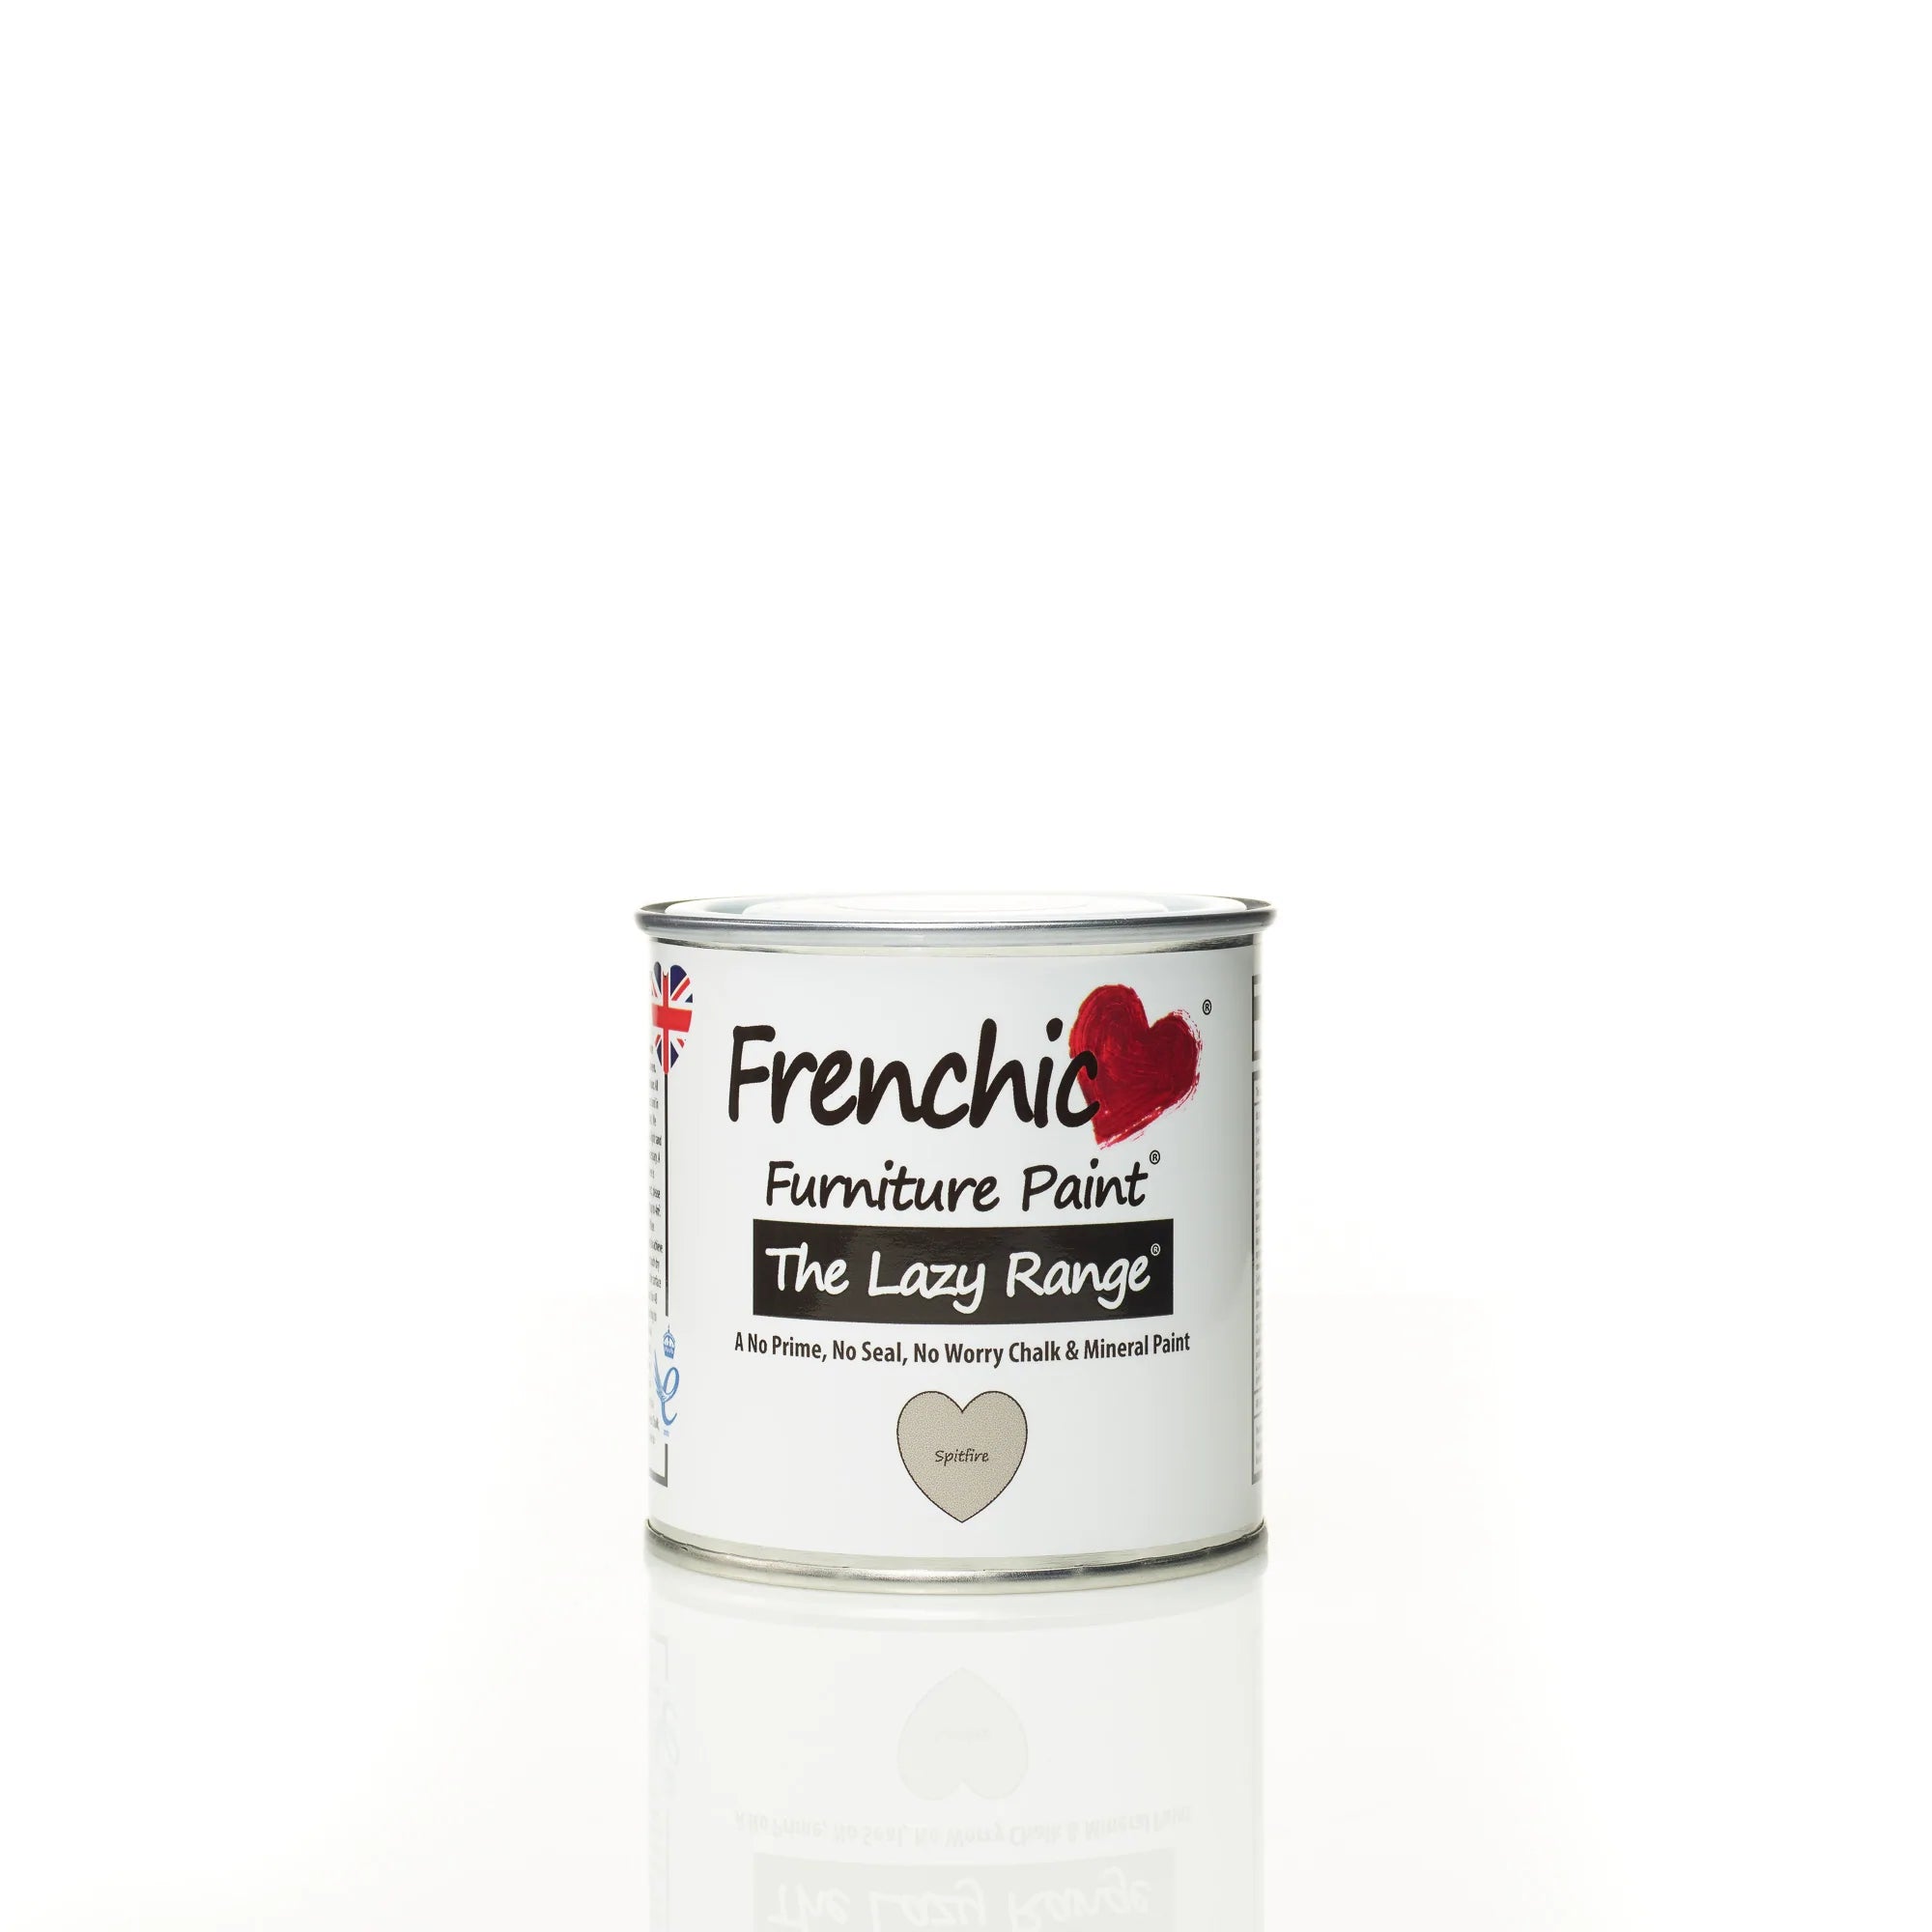 Frenchic Paint | Lazy Range - Spitfire by Weirs of Baggot St